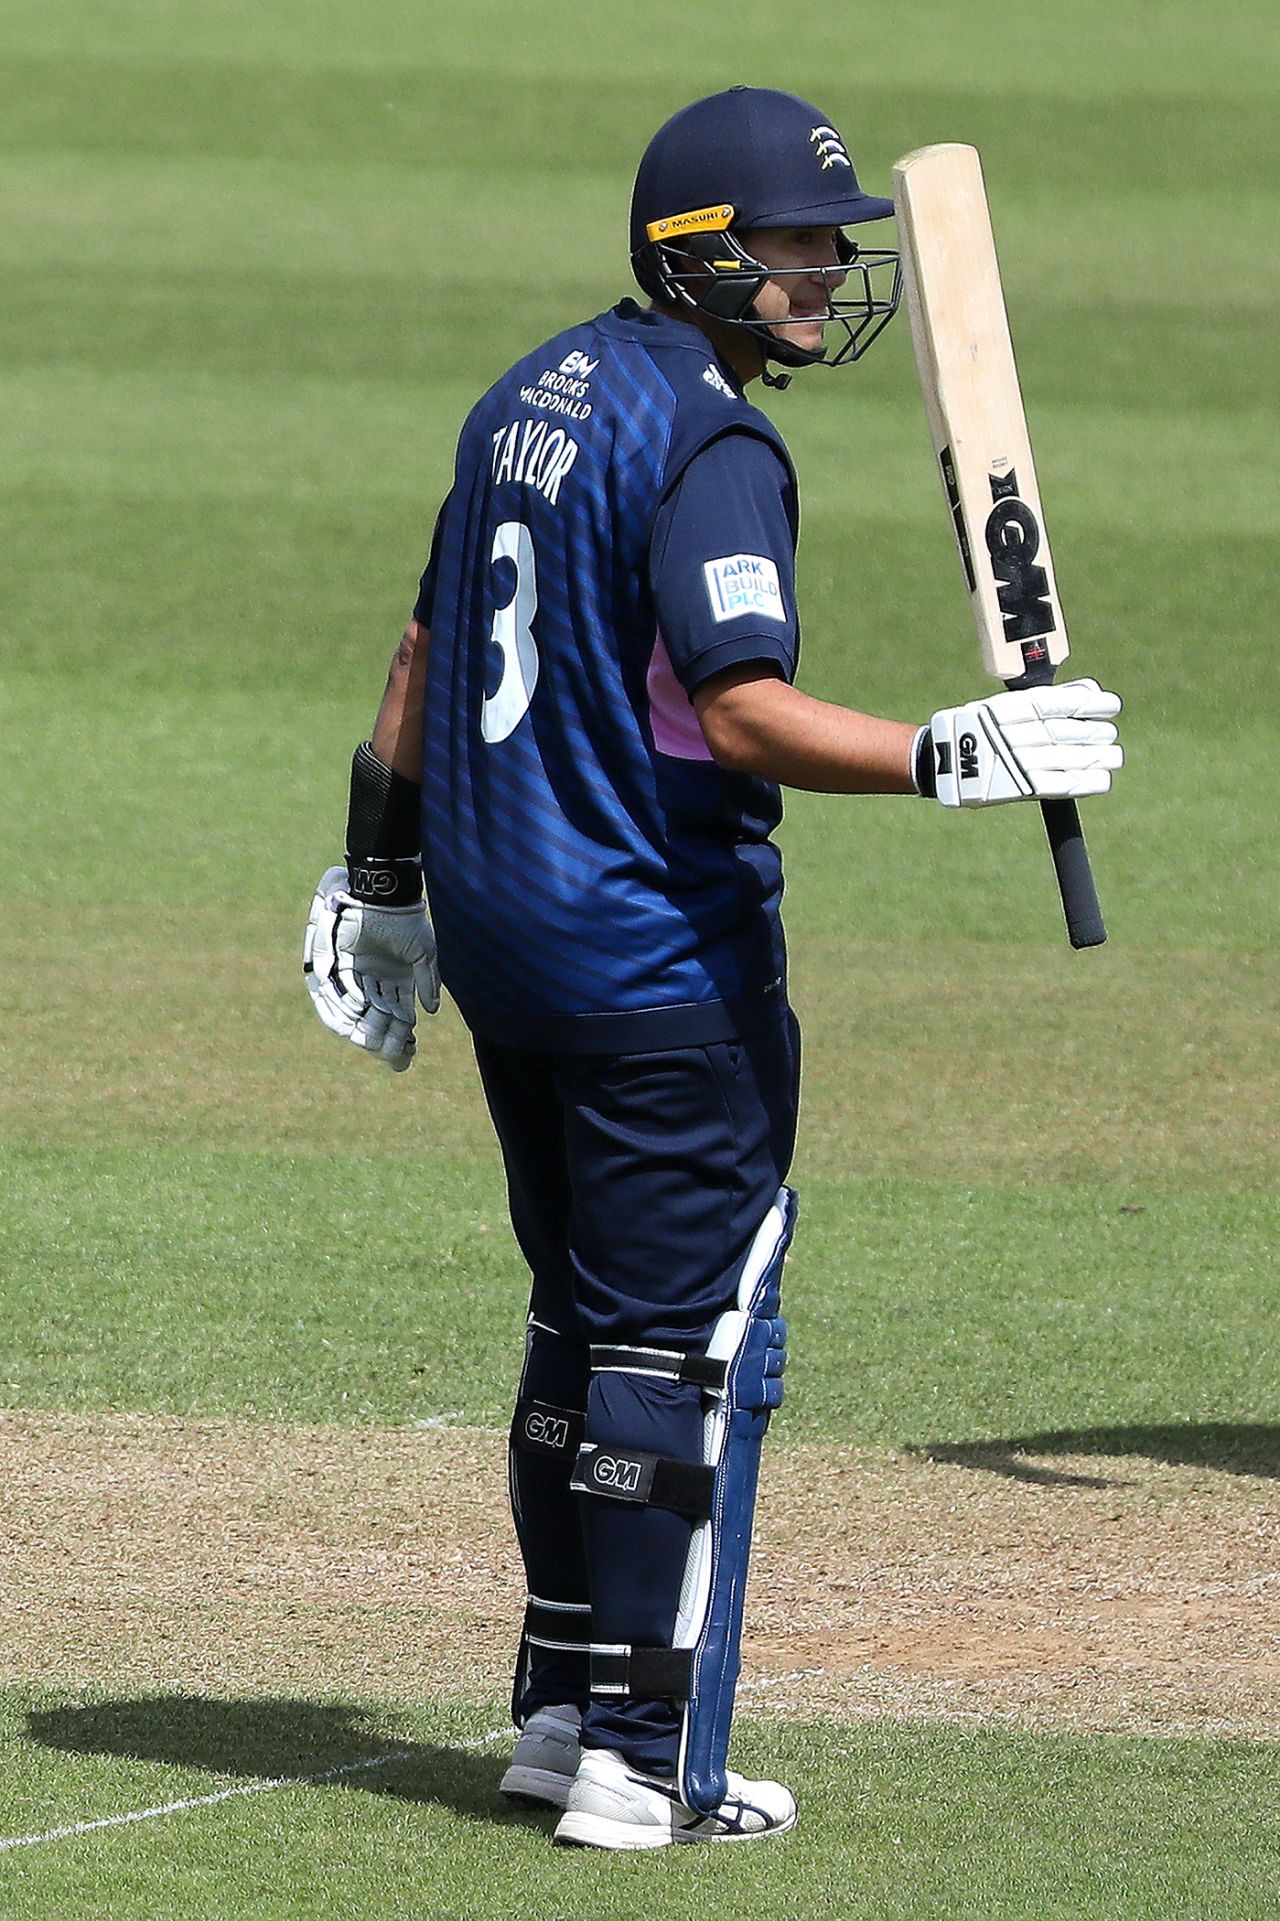 Ross Taylor made a half-century on Middlesex debut, Surrey v Middlesex, Royal London Cup, South Group, The Oval, April 25, 2019